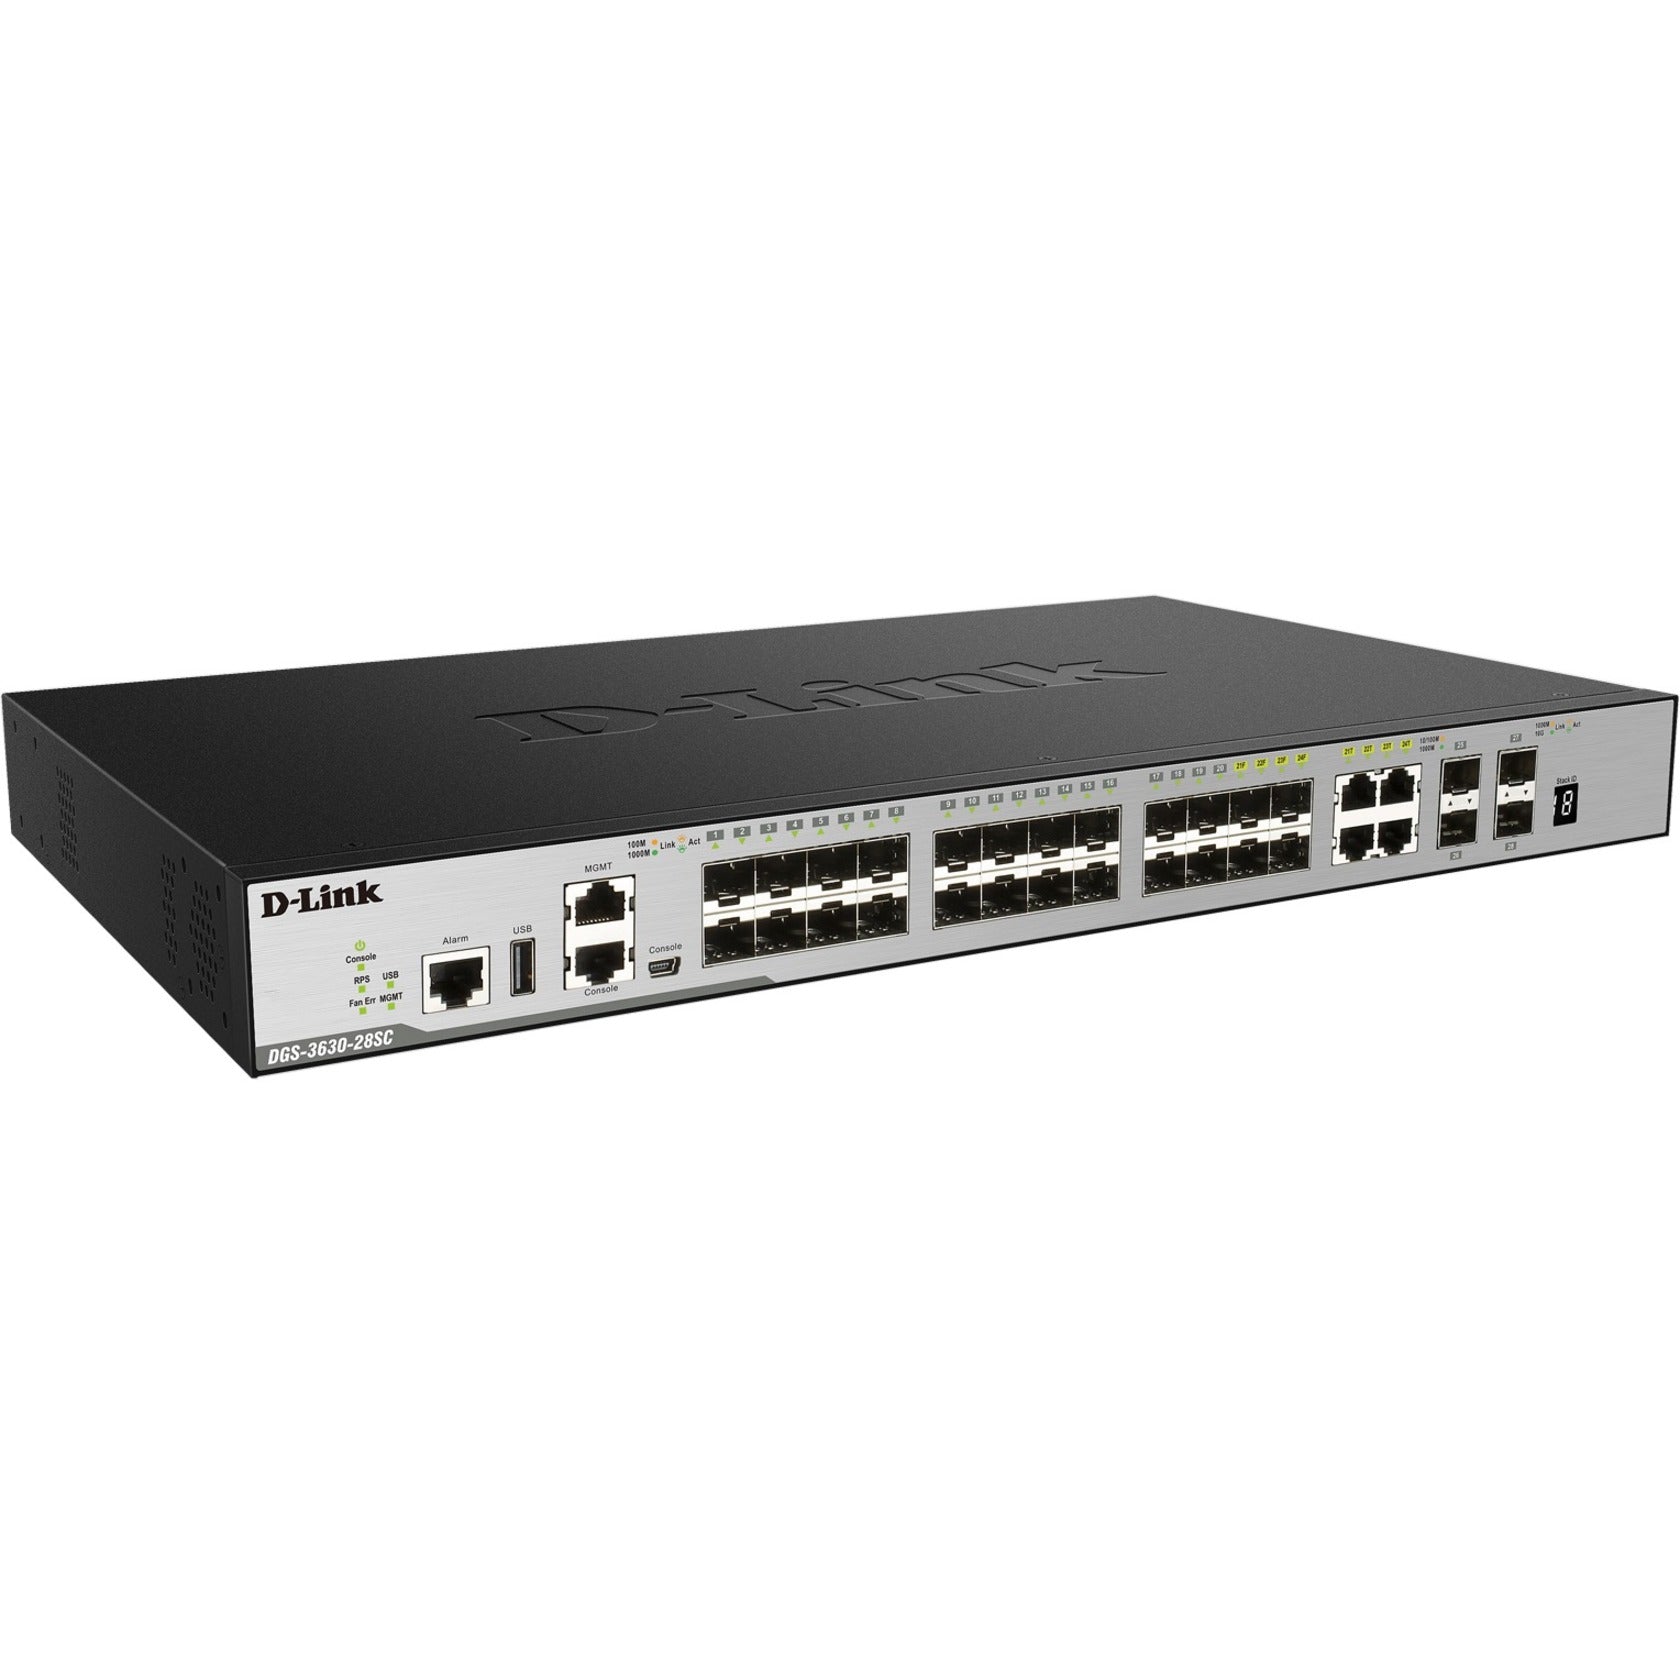 D-Link DGS-3630-28SC/SI 28-Port Layer 3 Stackable Managed Gigabit Switch including 4 10GbE Ports, Lifetime Warranty, China Origin